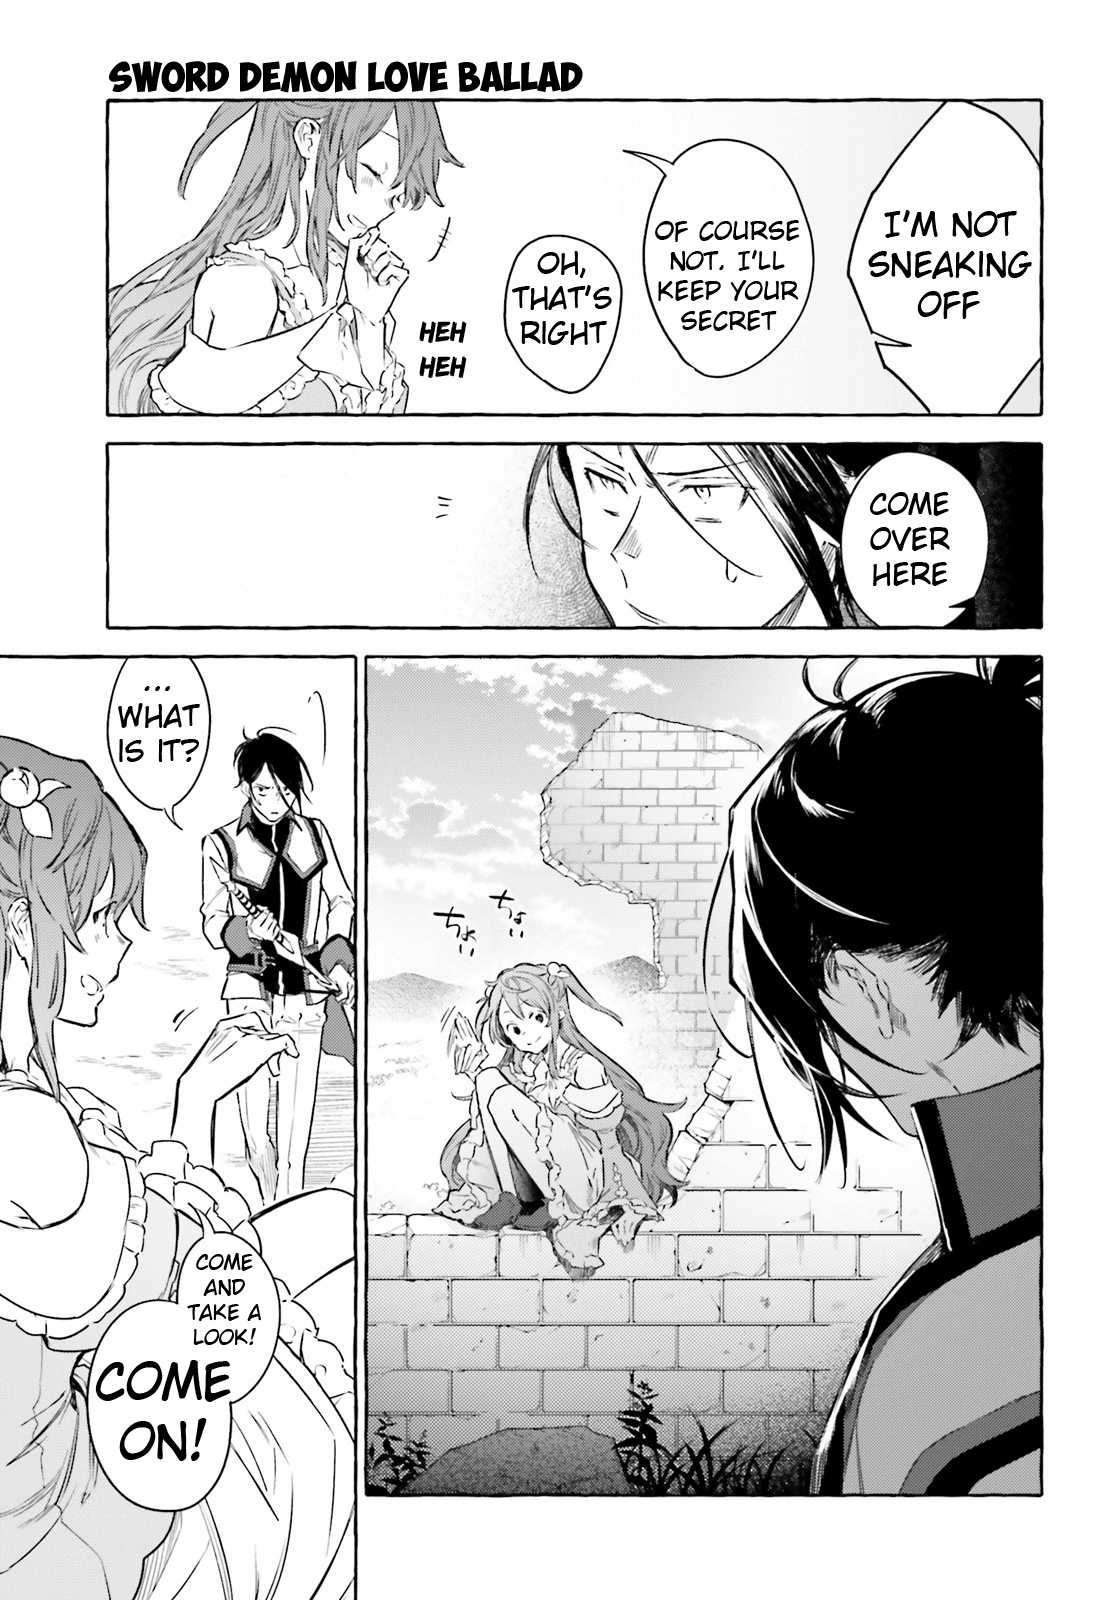 Re: Starting Life In Another World From Zero: Sword Demon Love Ballad Chapter 5